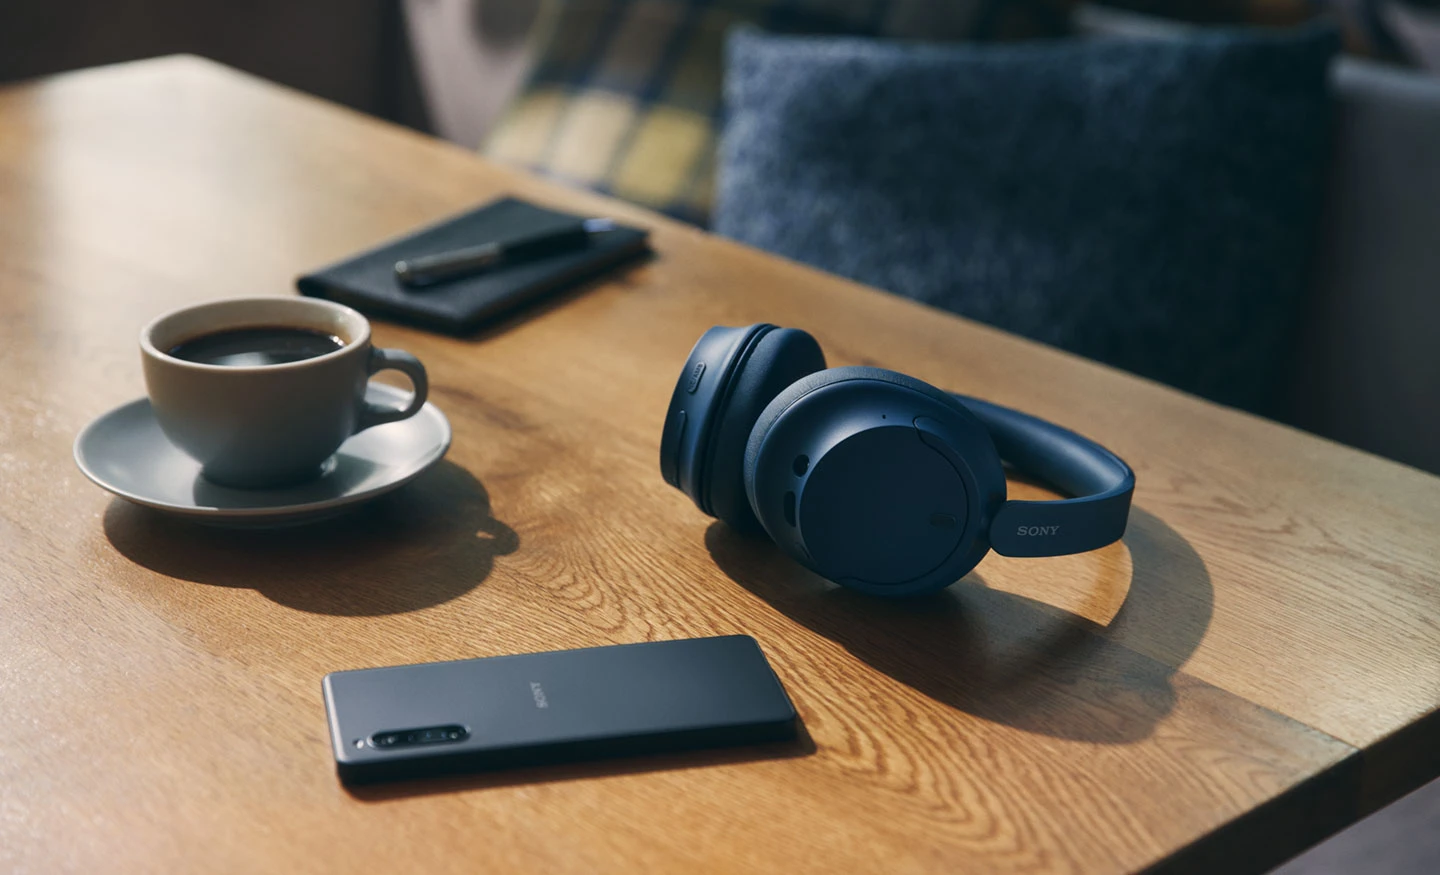 Sony has launched the WH-CH720N full-size active noise cancelling headphones for £100